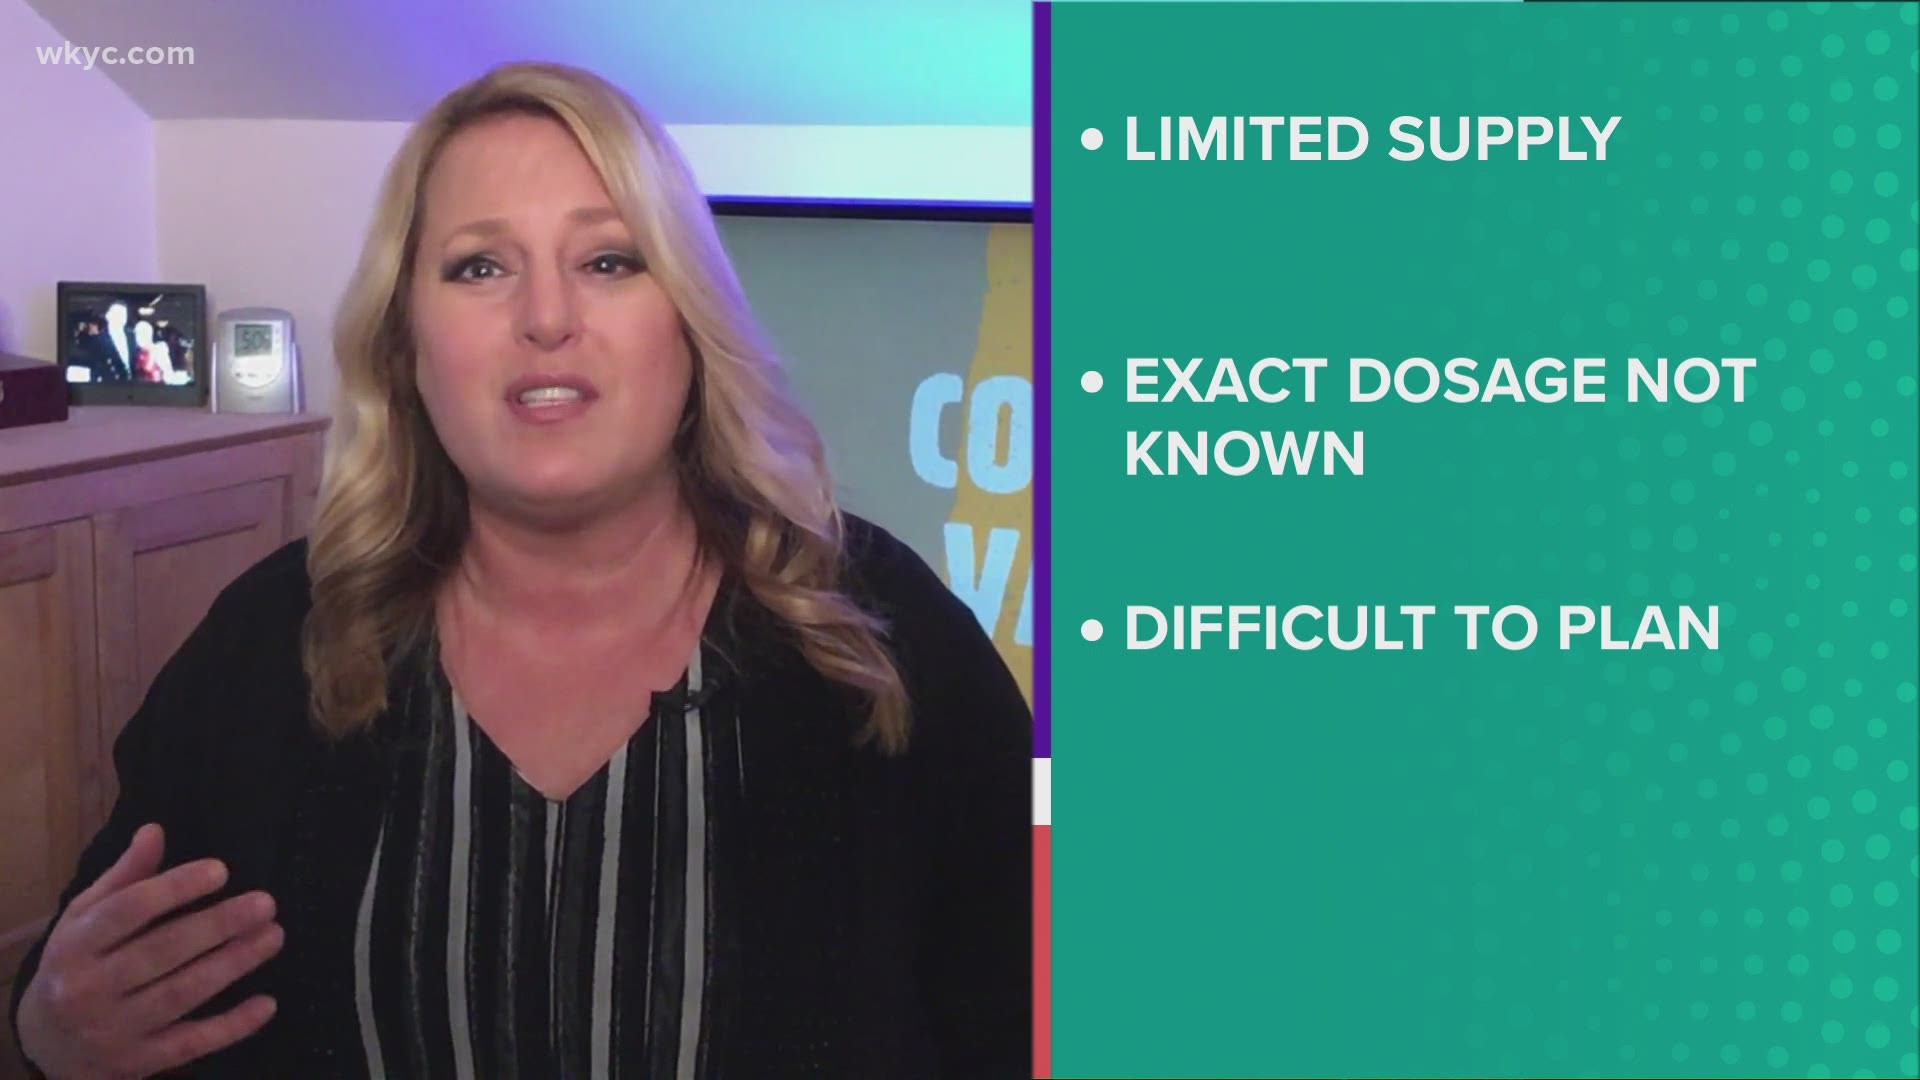 It's a question on many minds. How do I get the COVID-19 vaccine? 3News' Monica Robins tries to provide some answers.